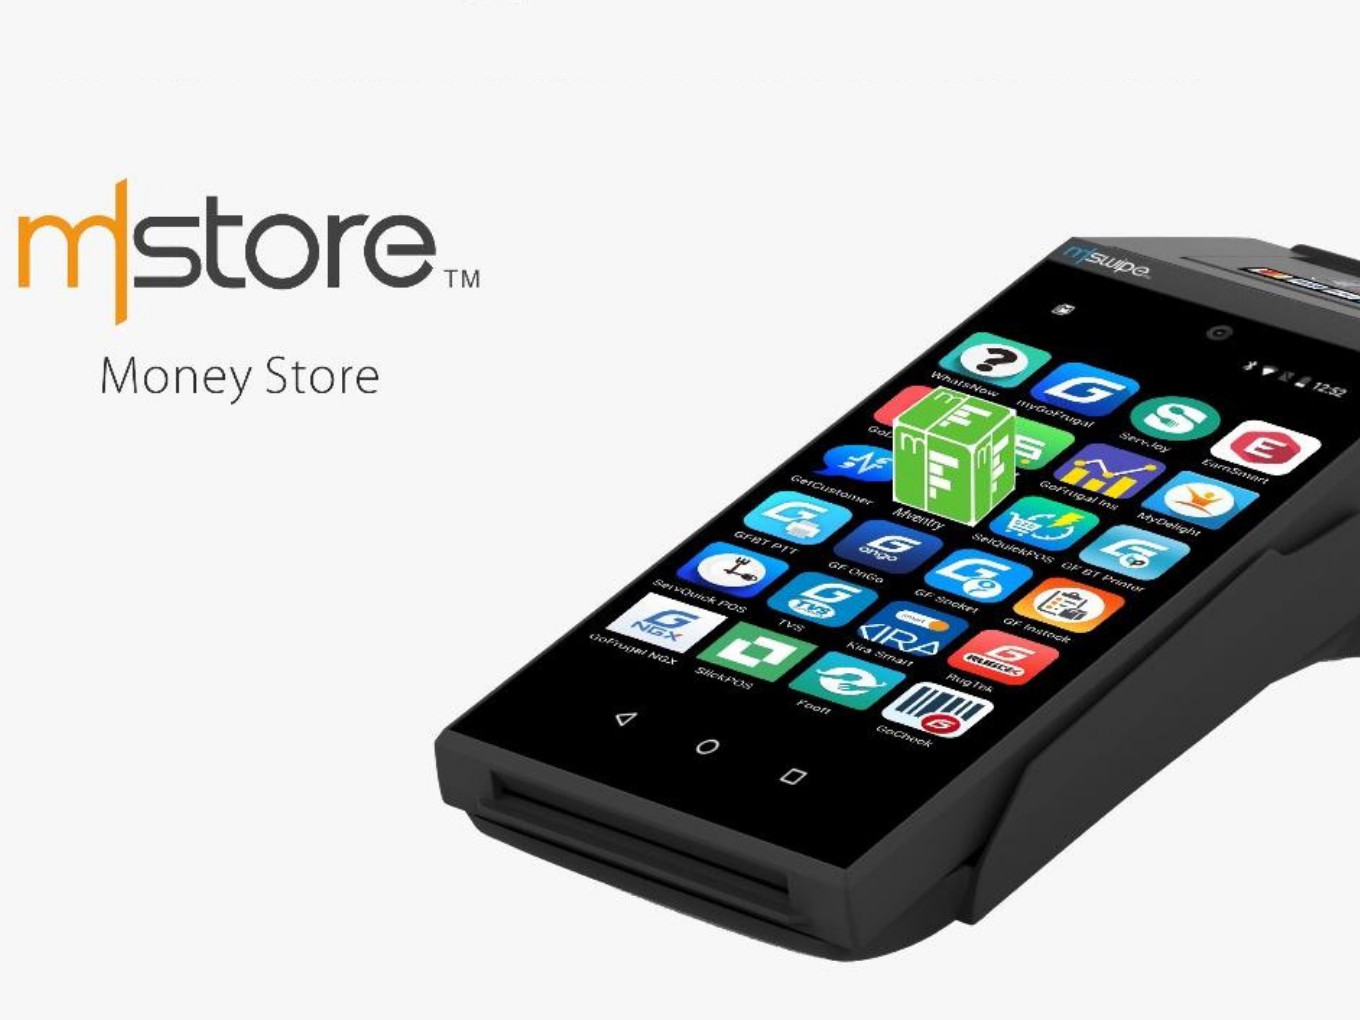 Mswipe’s Money Store Brings PoS Apps, Payment Tools For Merchants